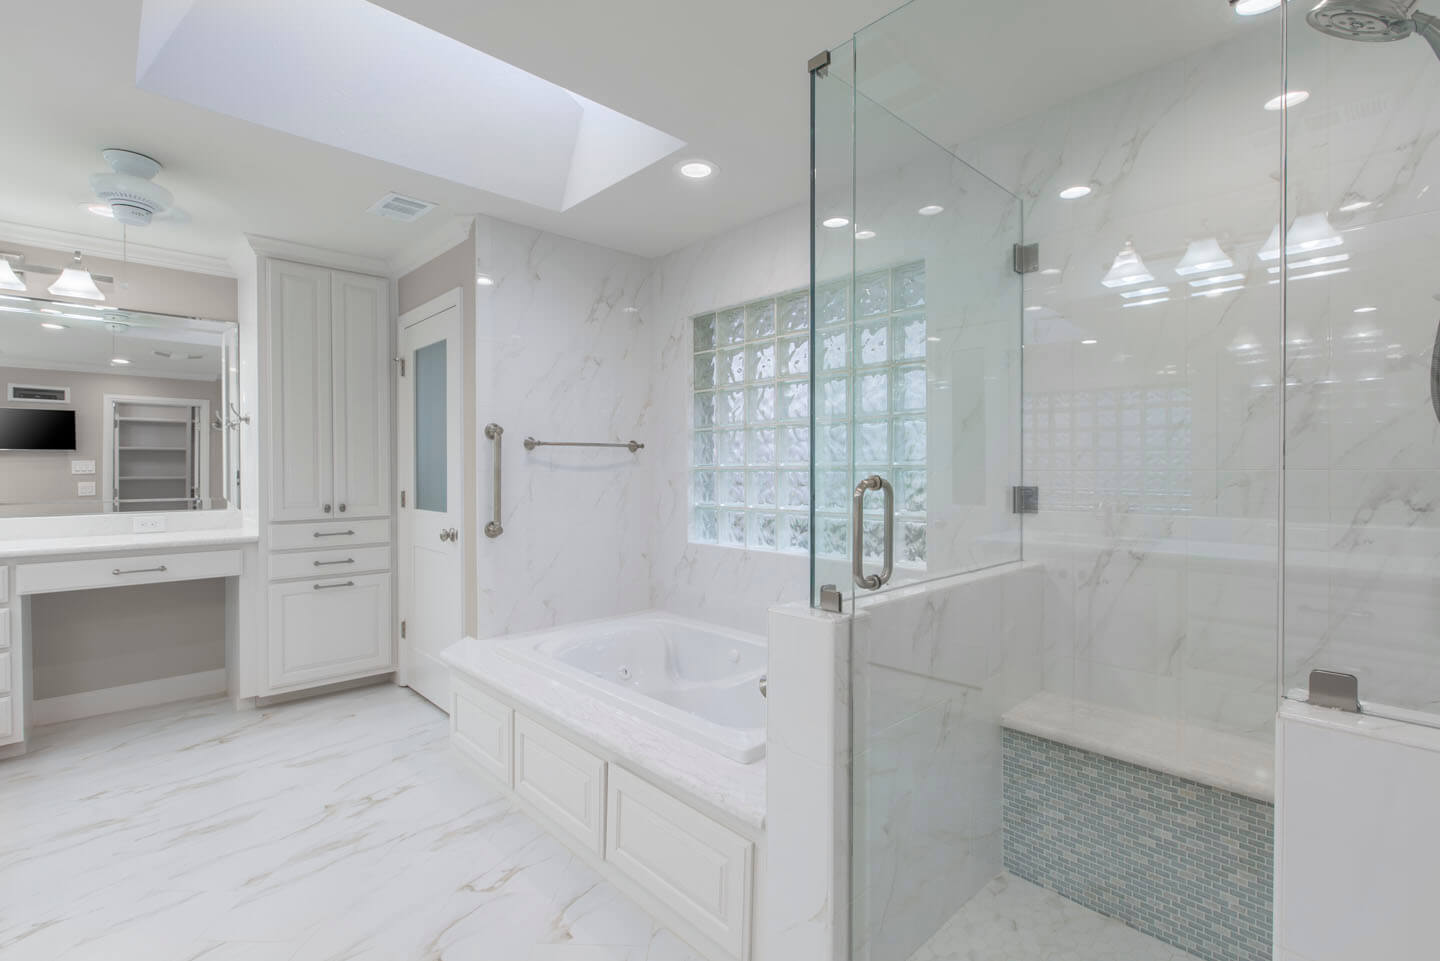 How Bathroom Remodels Add to Home Value